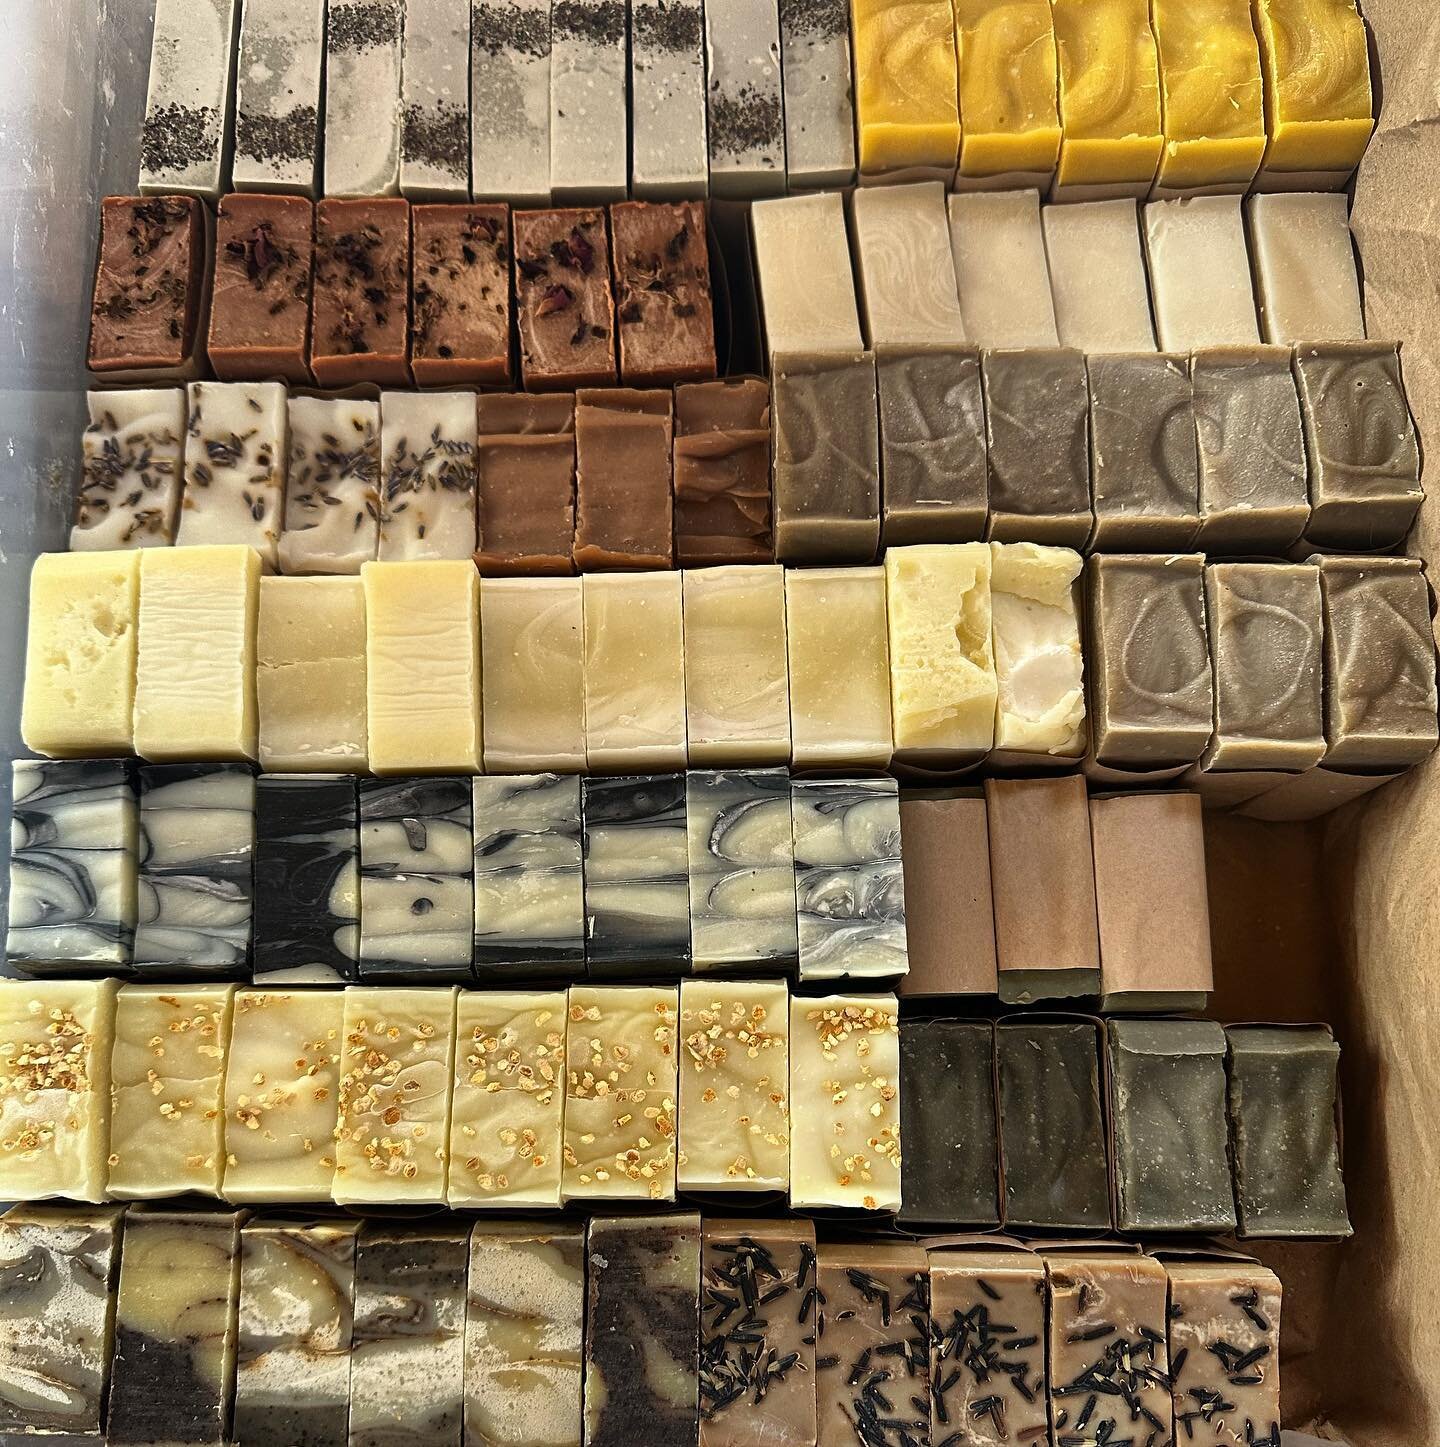 Soap, soap, soap, soap, soap. Bringing our product out into the world this week. Stay tuned for where to get your tallow soaps locally in the Valley.